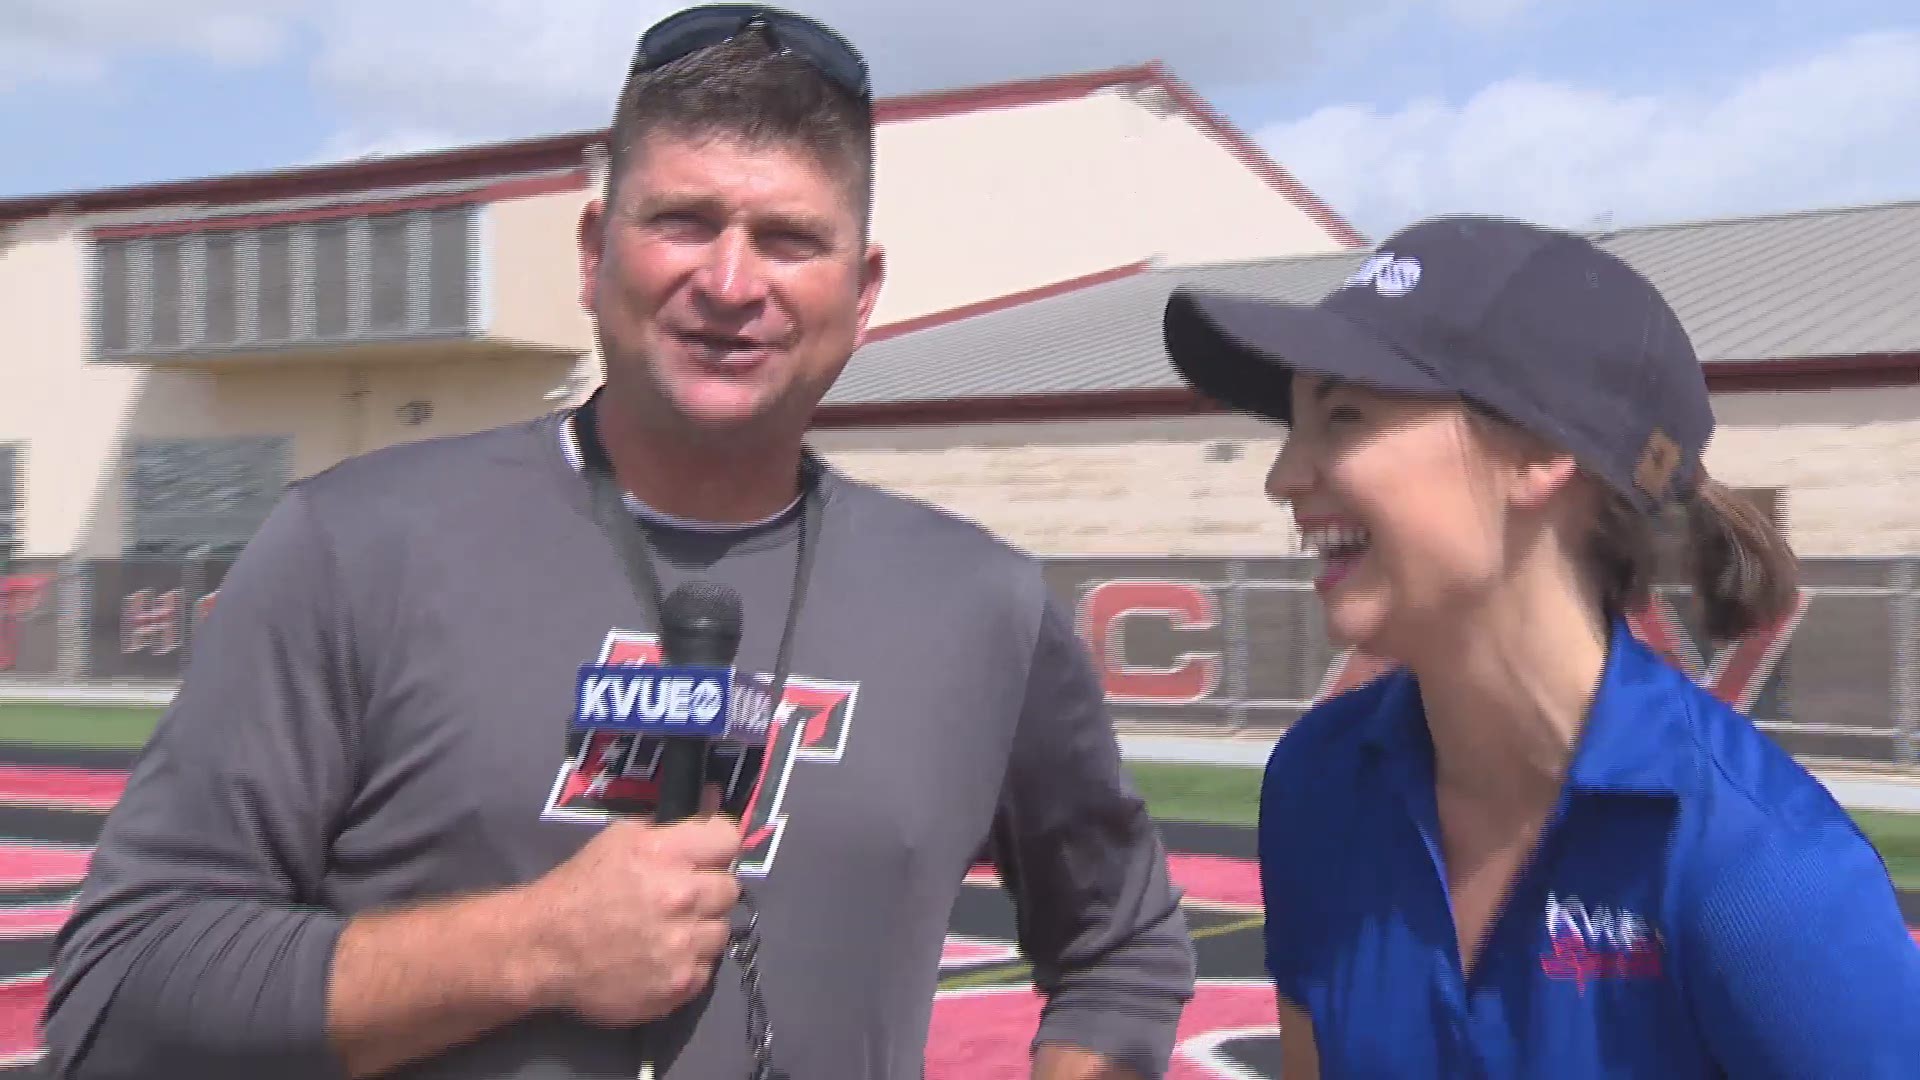 KVUE's Stacy Slayden talks with Lake Travis coach Hank Carter about old times in Stephenville and the Cavaliers 2018 season.